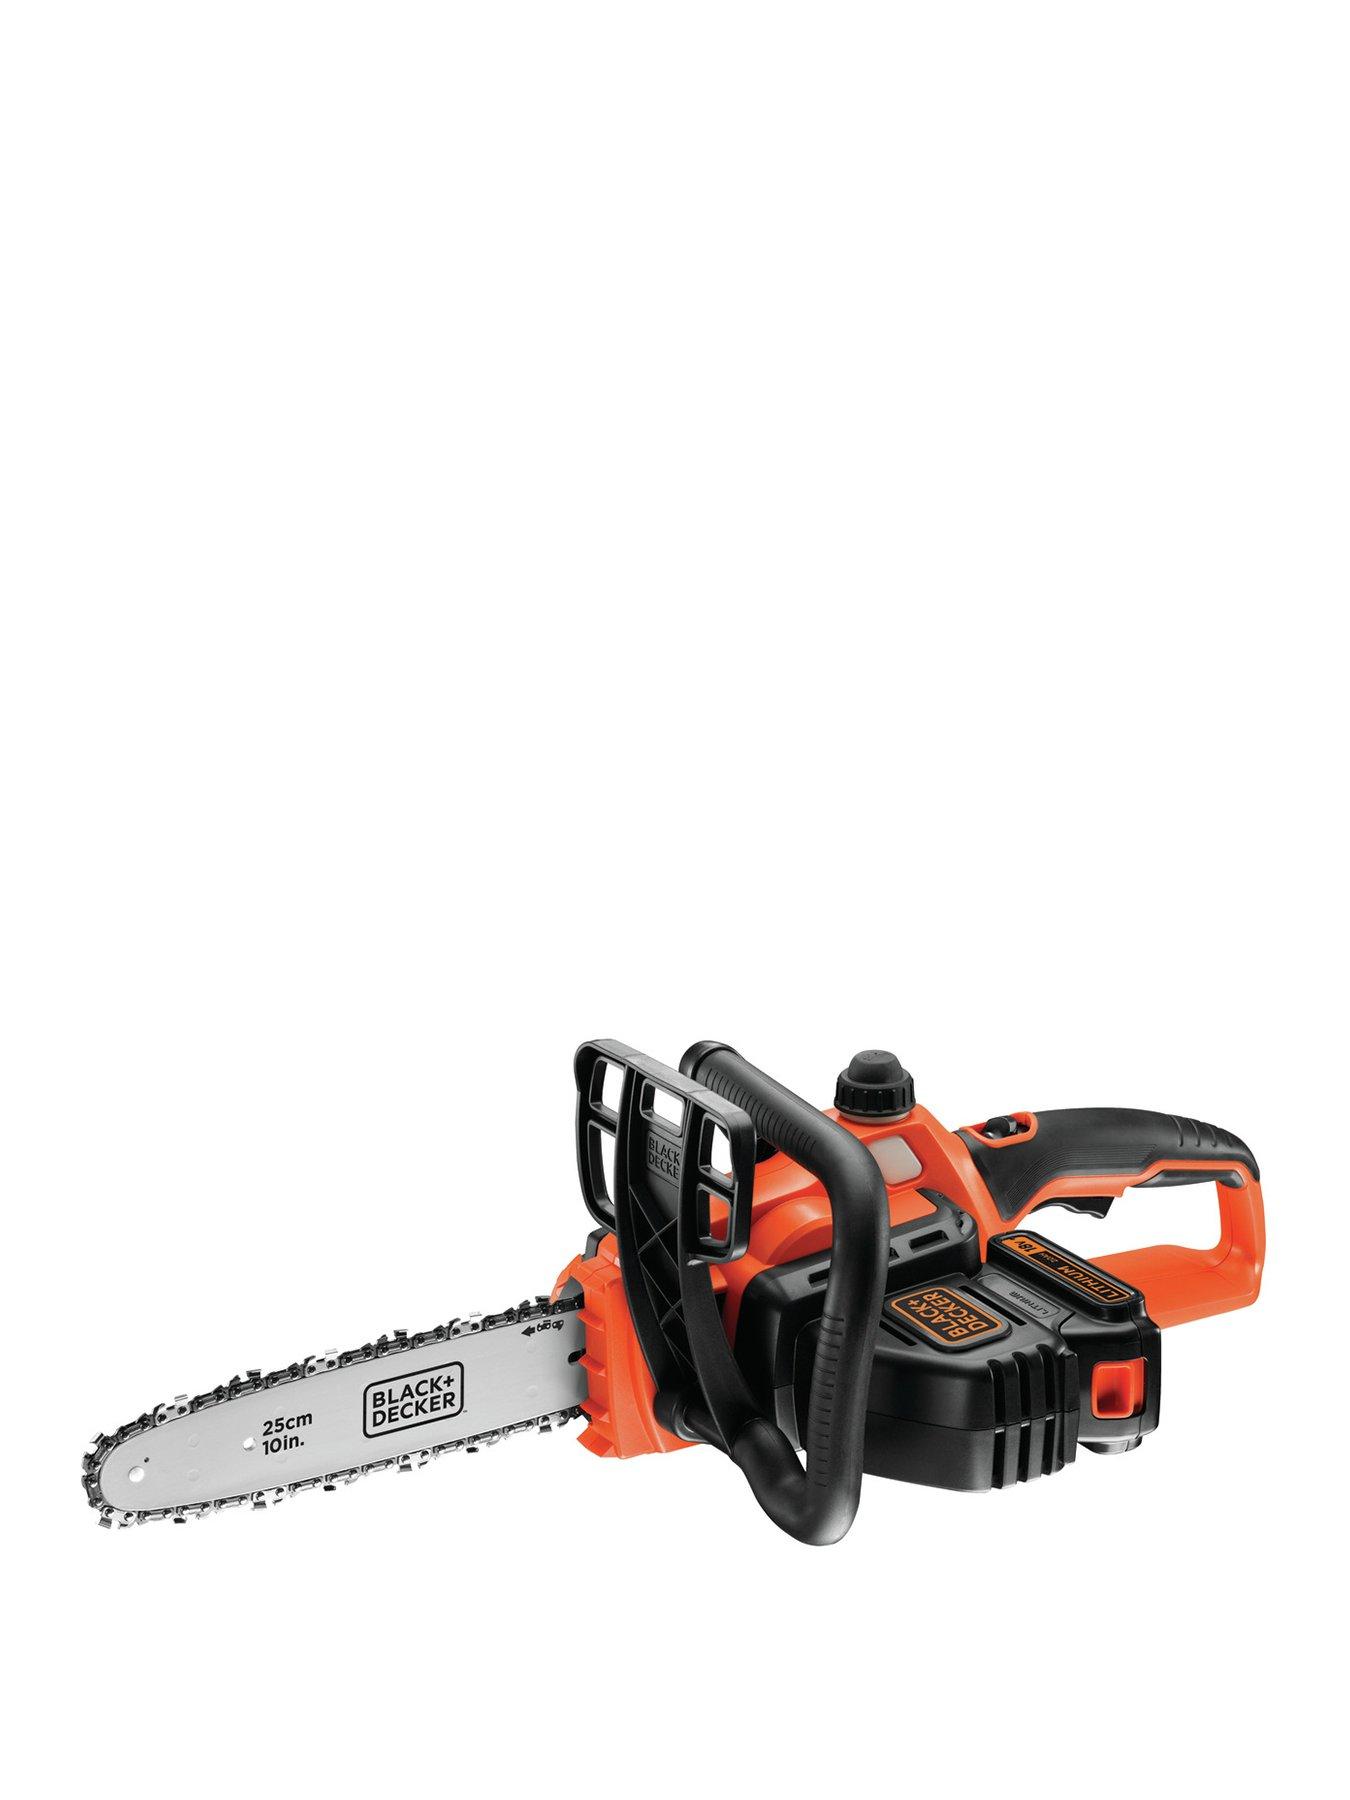 Black and Decker PS7525 Corded Pole Chain Saw 2.7m Height 25cm Bar